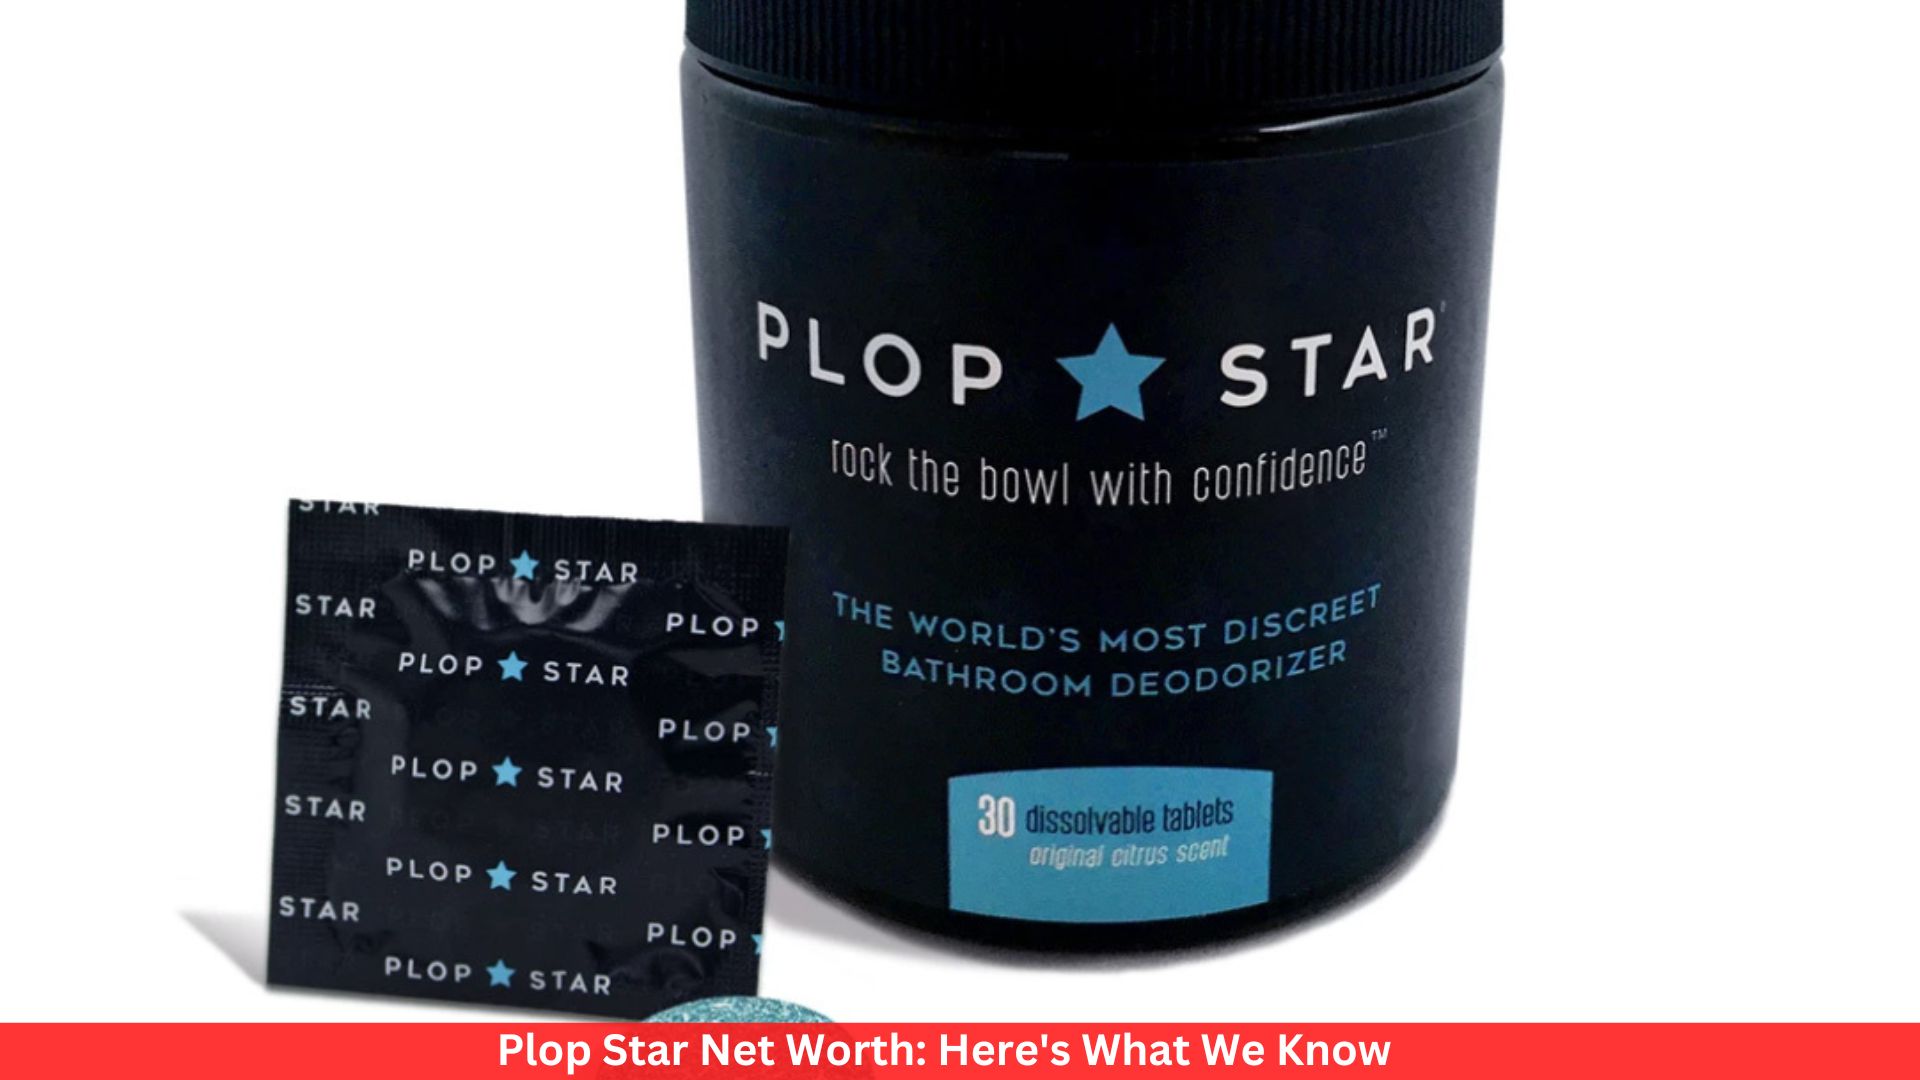 Plop Star Net Worth: Here's What We Know